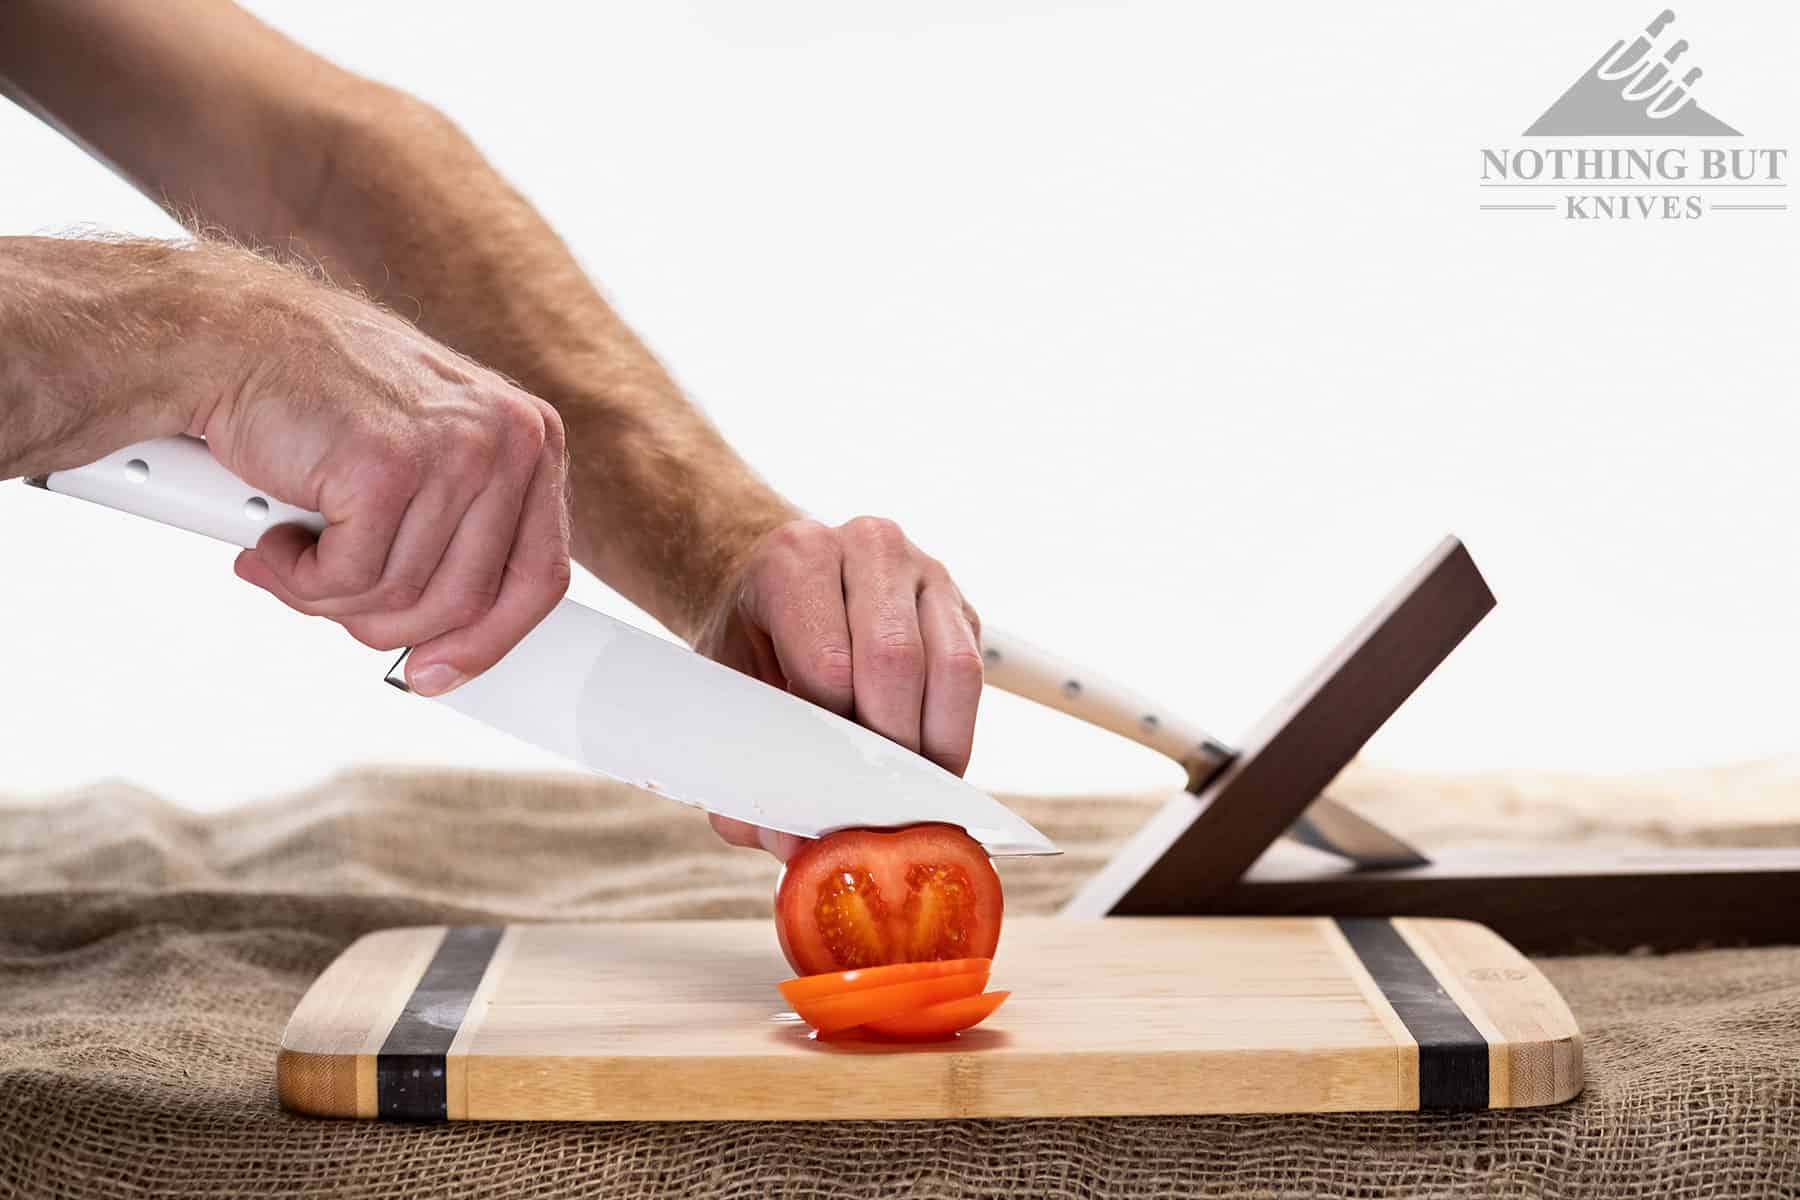 https://www.nothingbutknives.com/wp-content/uploads/2022/07/Slicing-A-Tomato-With-The-Cangshan-S1-Knife.jpg